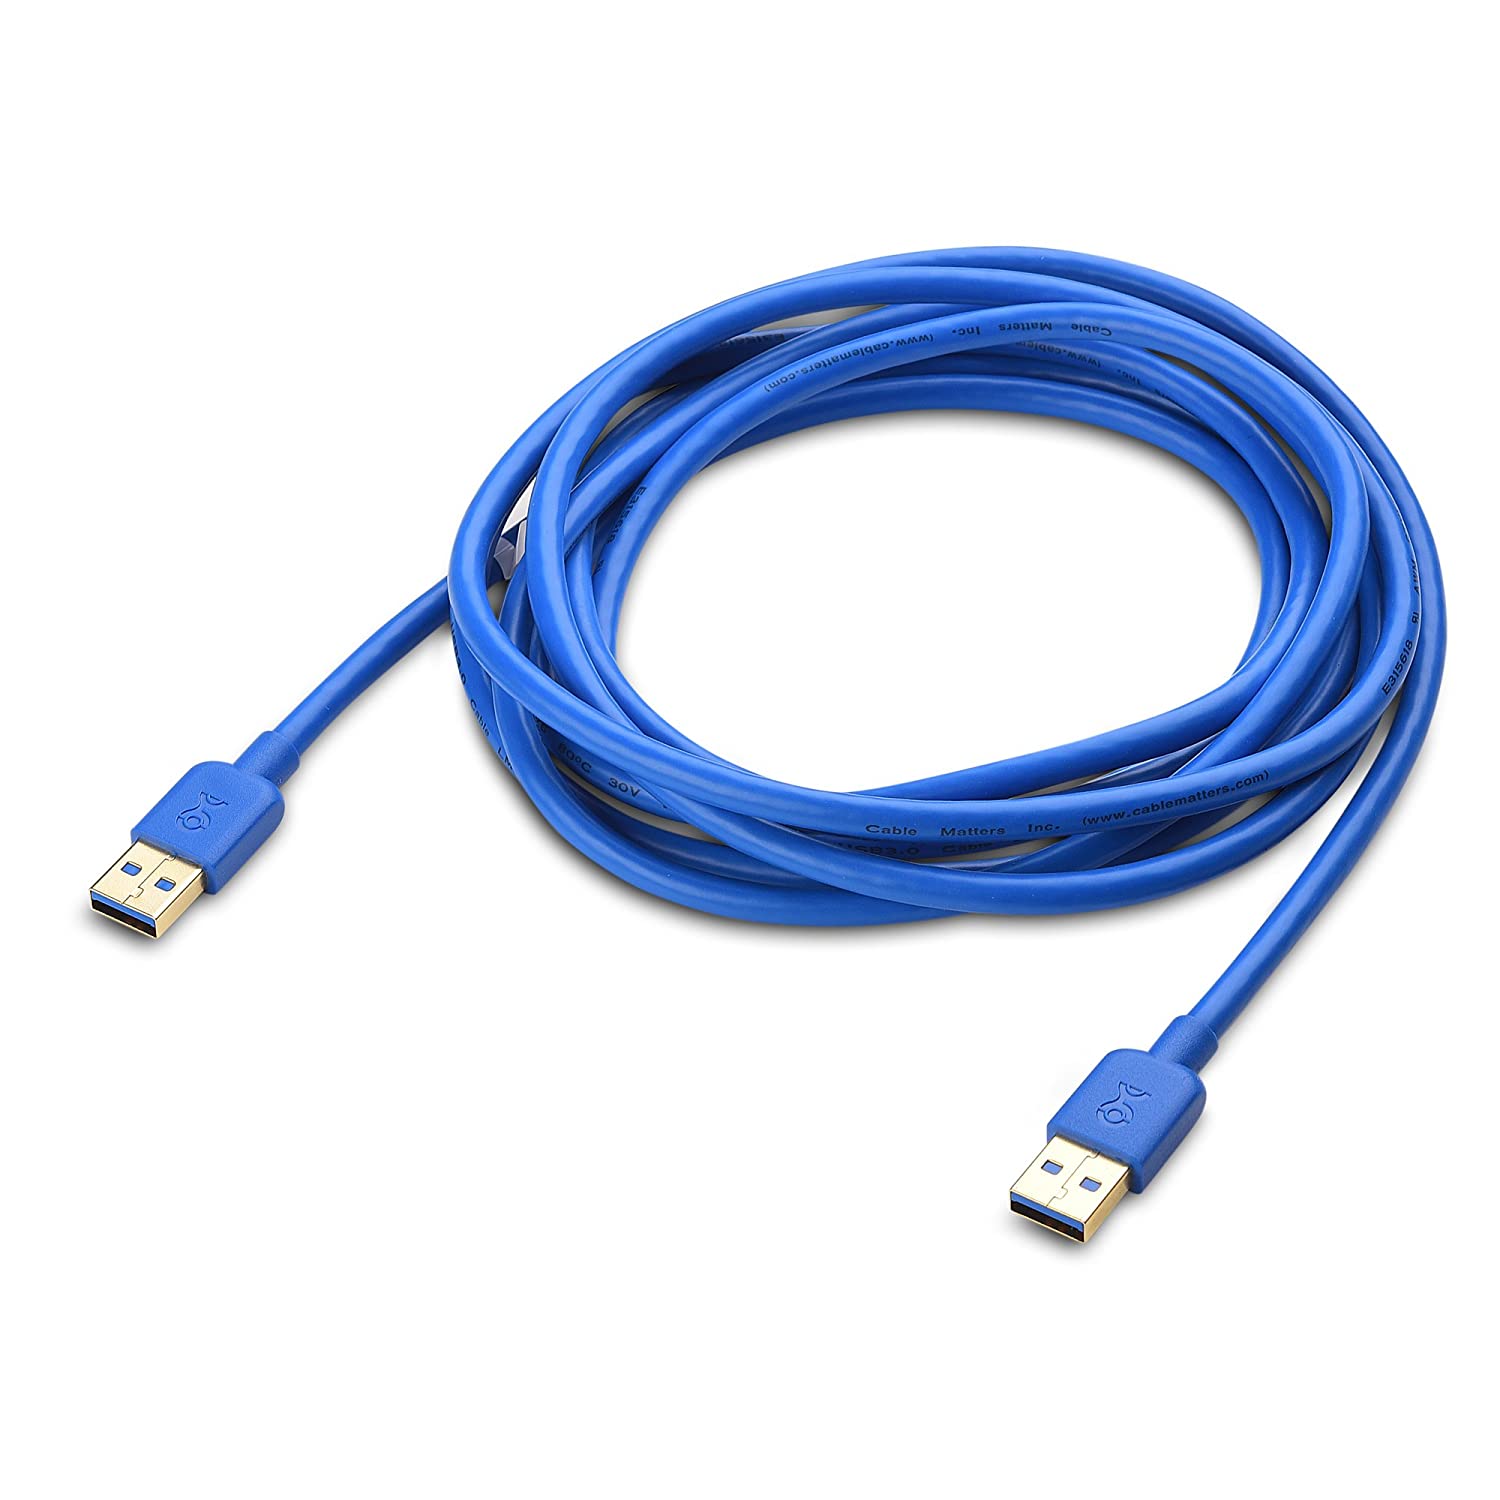 Cable Matters USB 3.0 Cable (USB to USB Cable Male to Male) in Blue 10 Feet - image 2 of 4